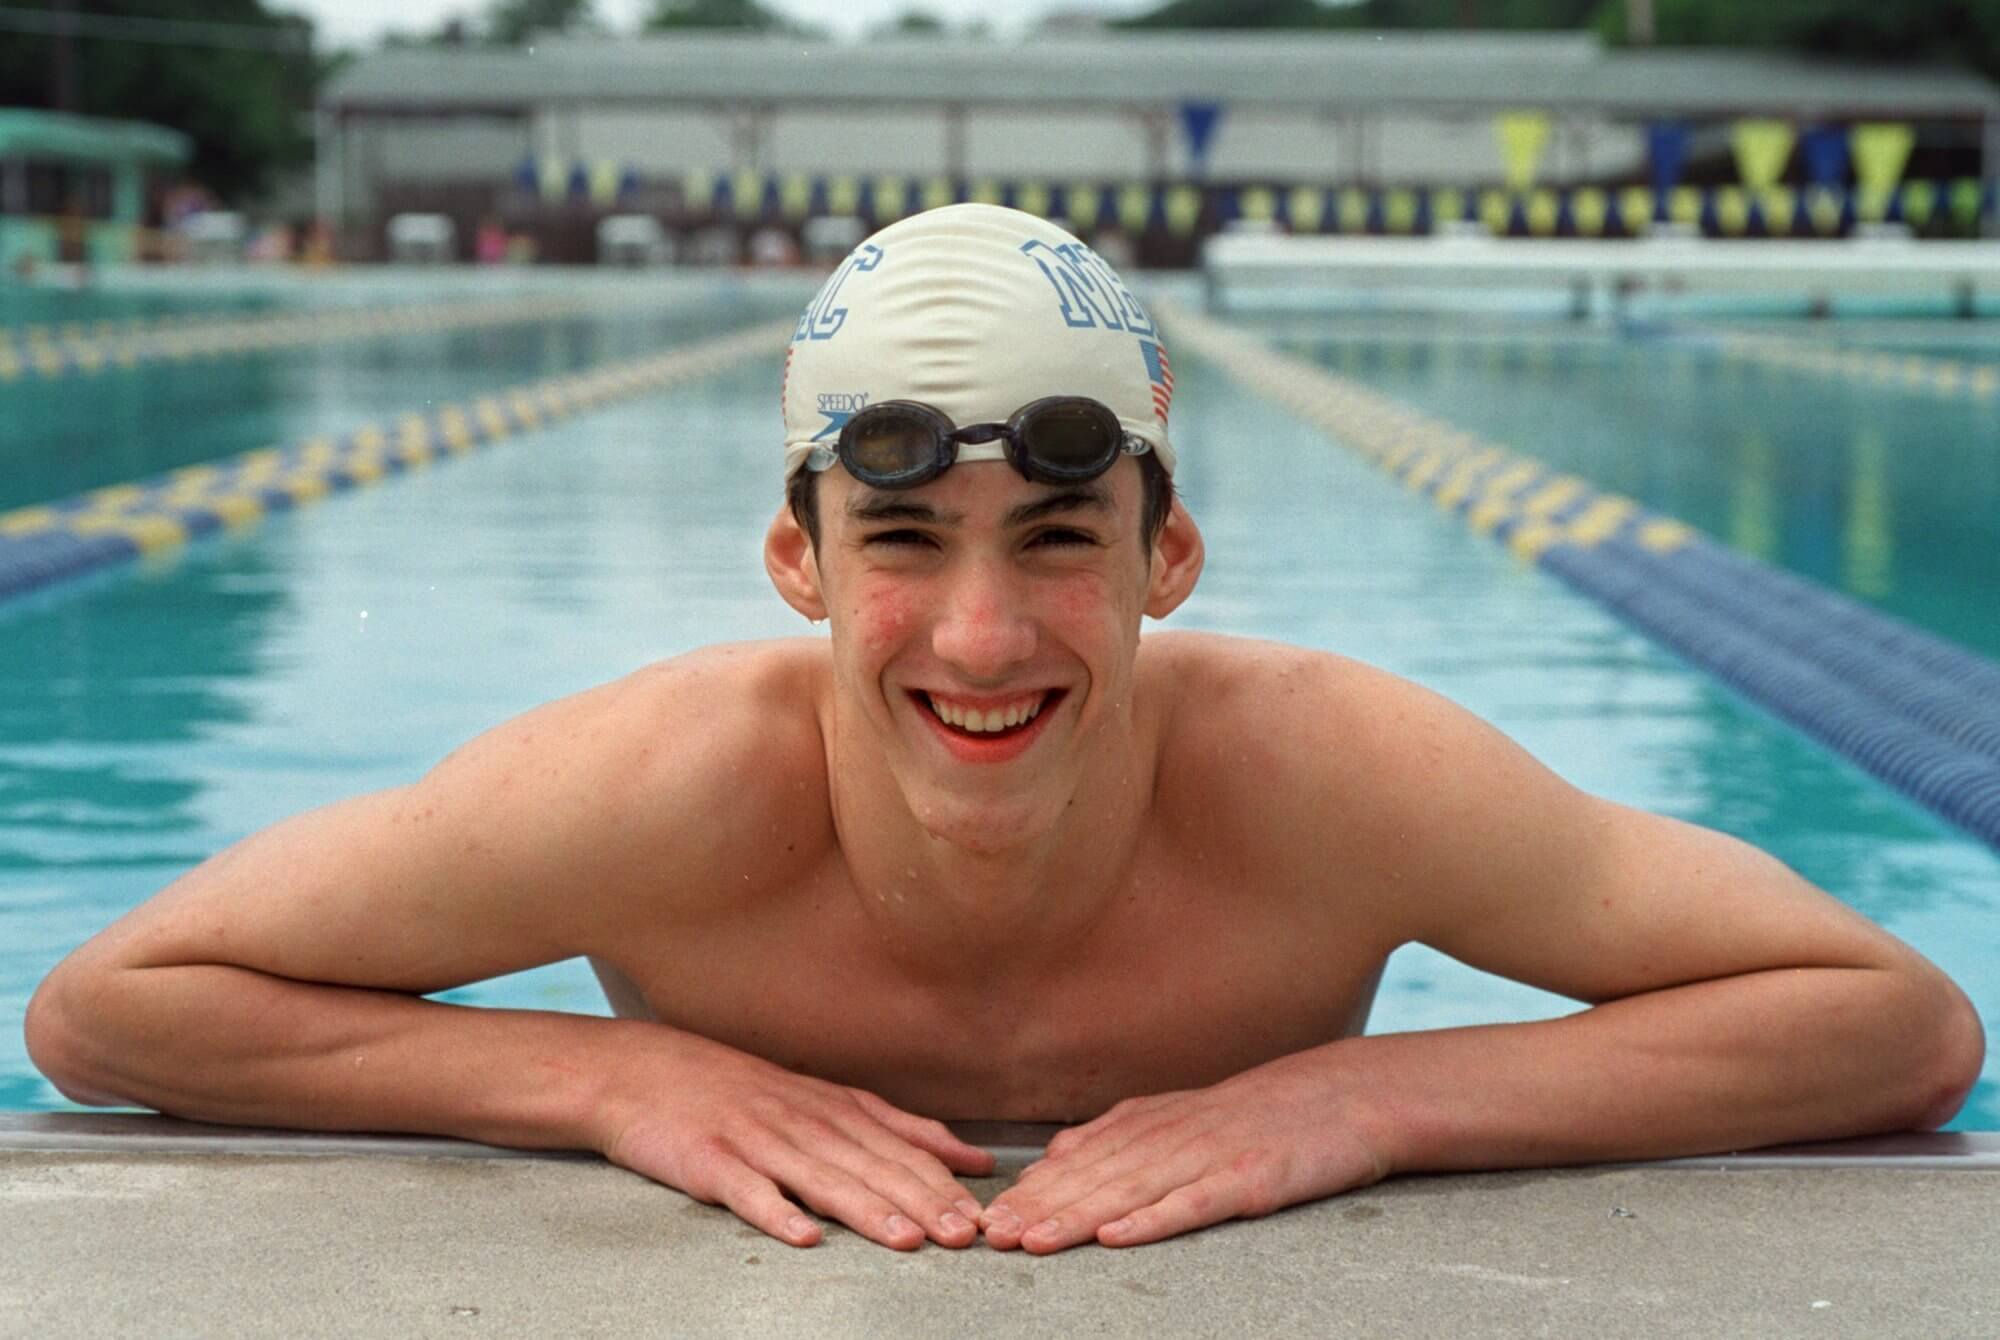 On This Date 15-Year-Old Michael Phelps Sets First World Record